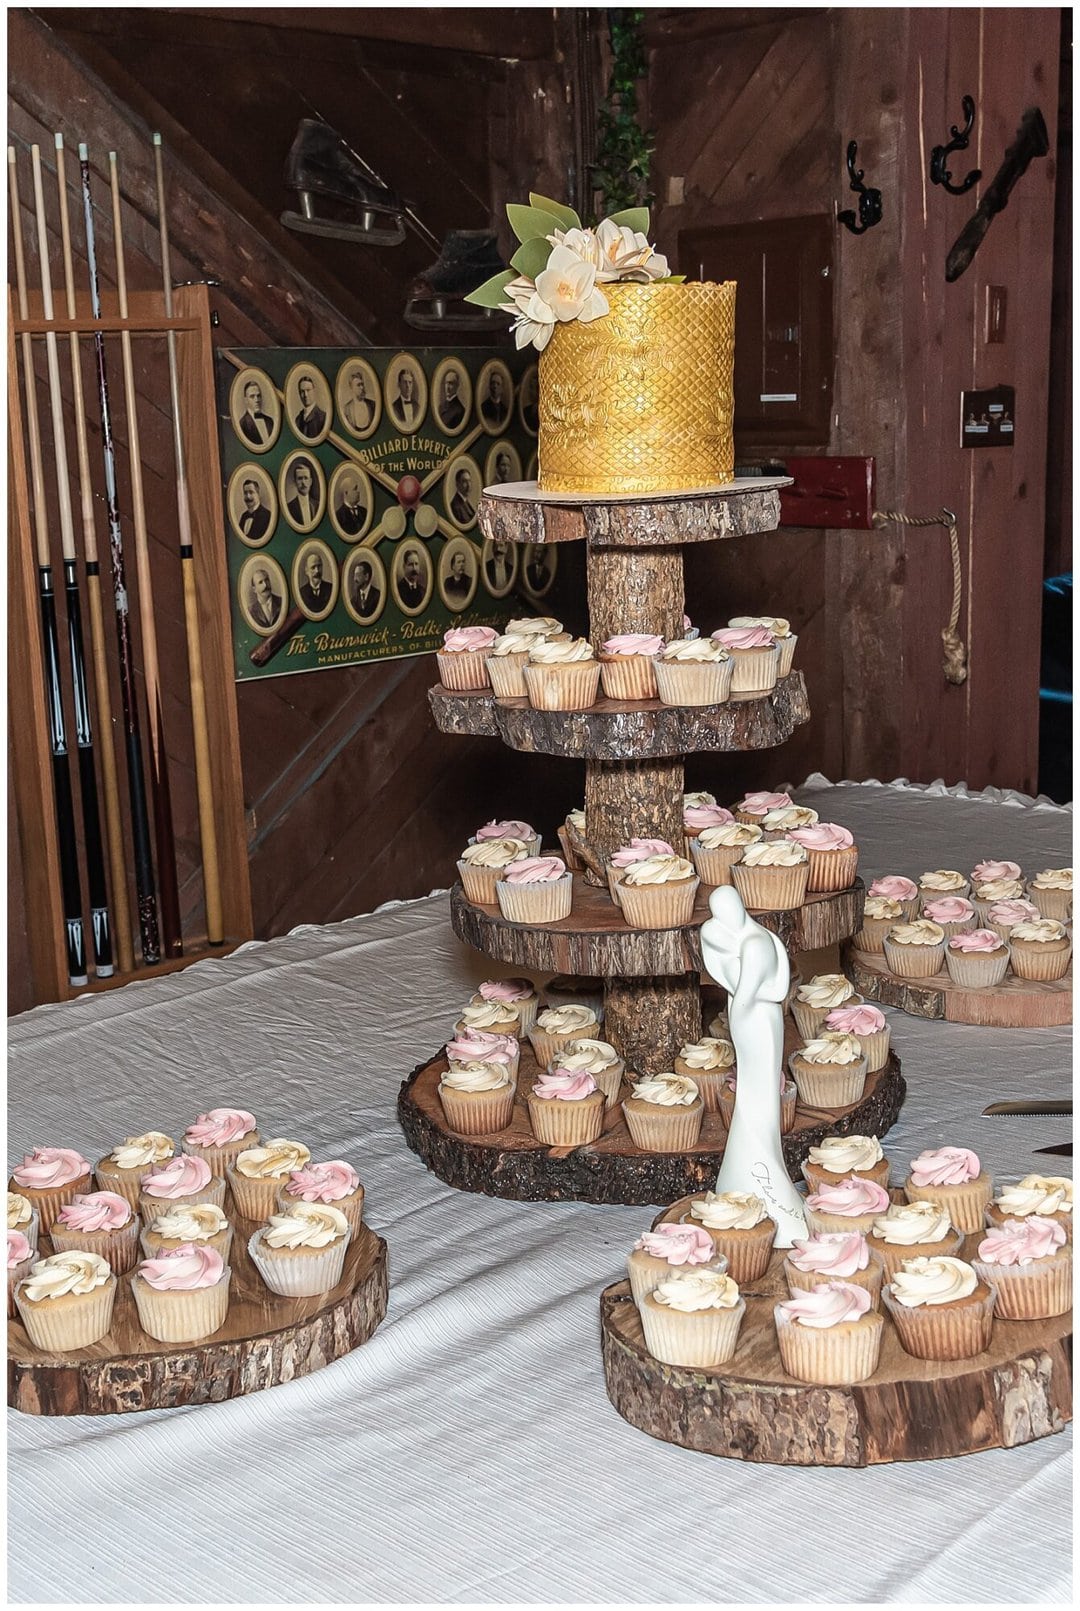 A rustic yellow wedding cake with cupcakes.